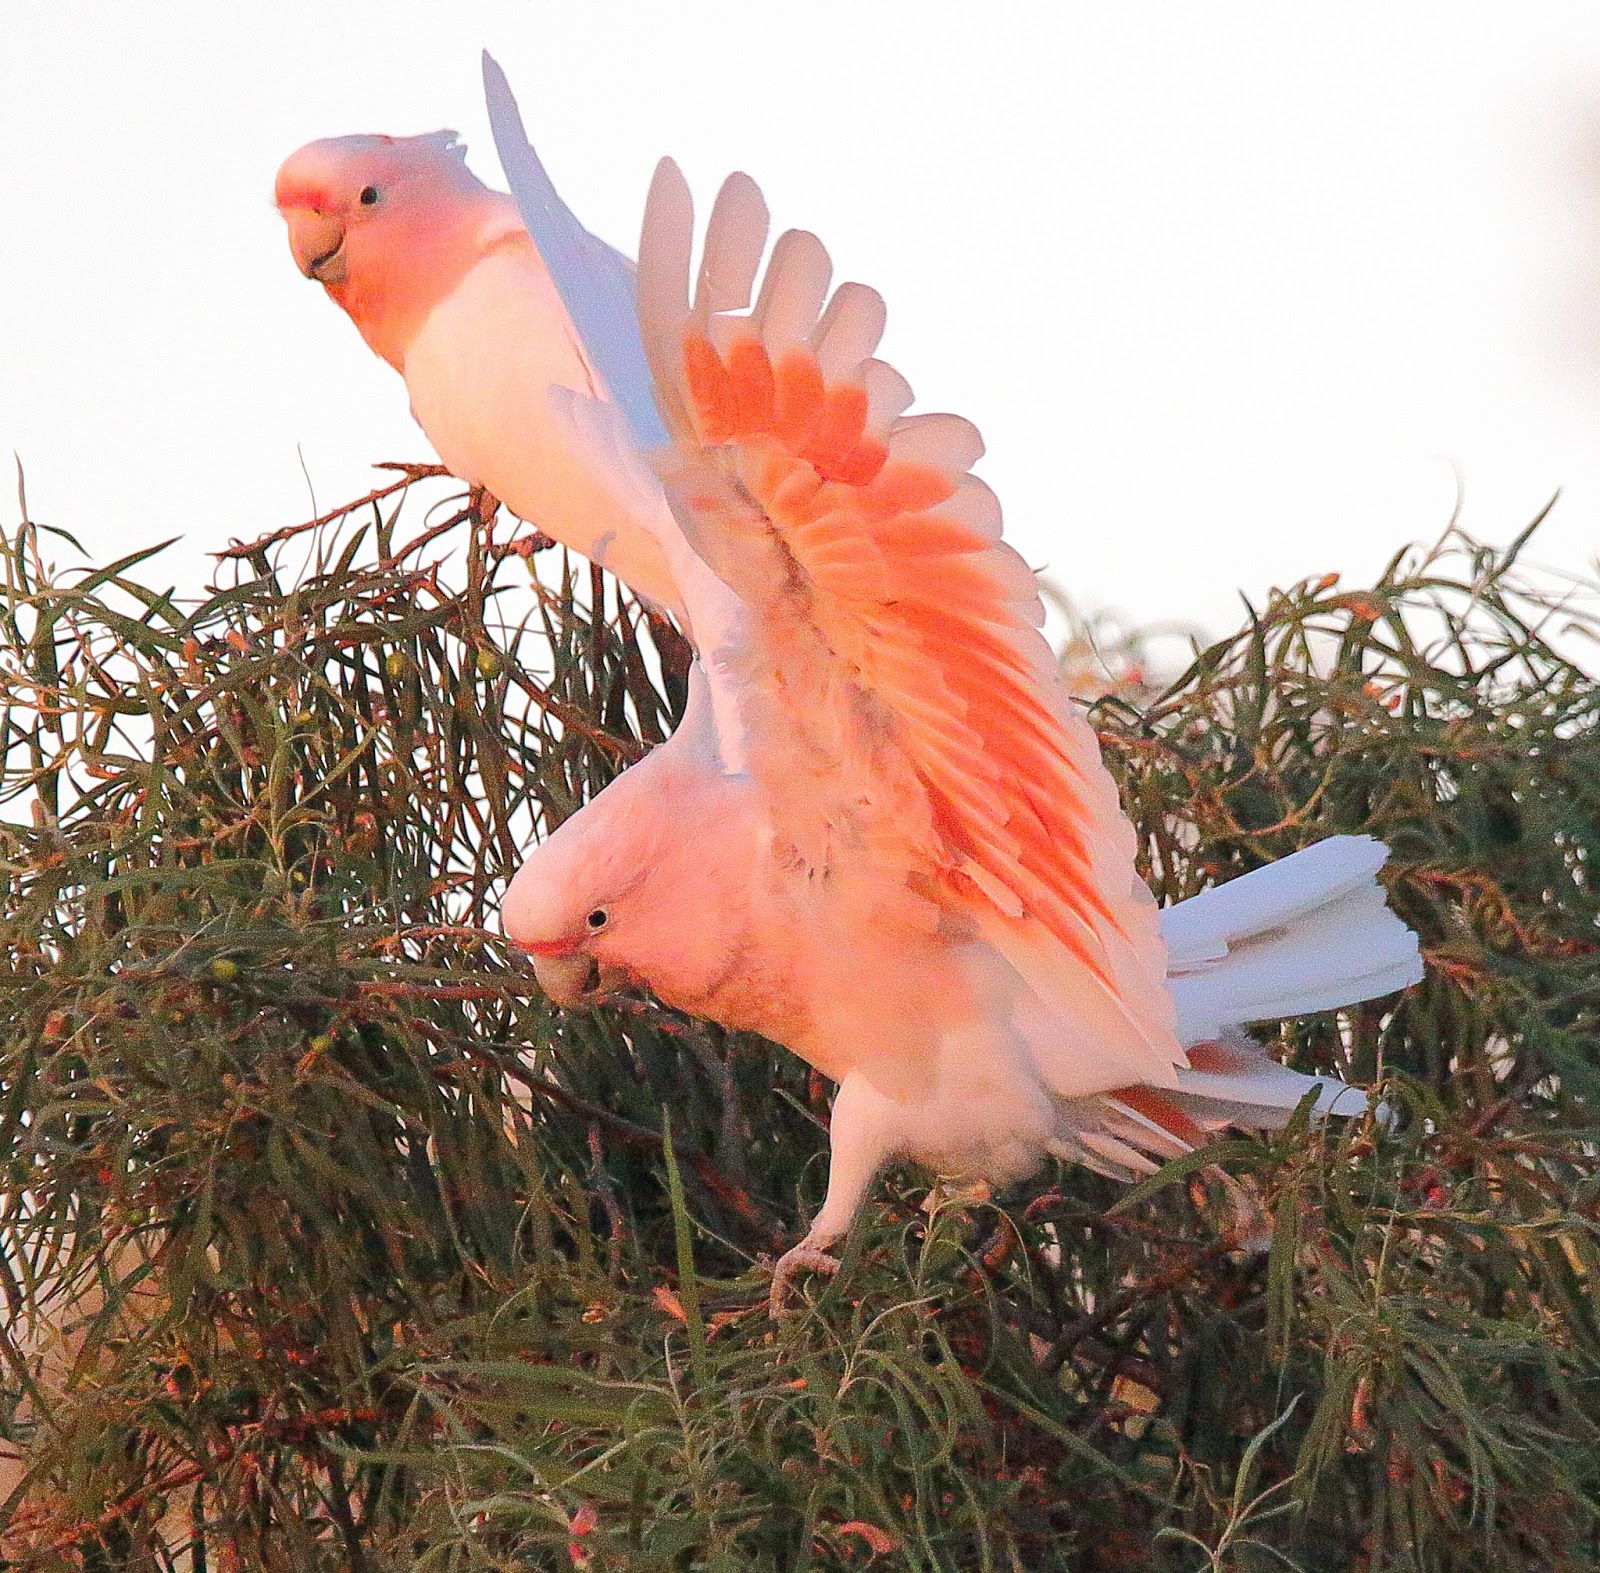 Richard Waring's Birds of Australia: Some "different" Major Mitchell or  Pink Cockatoos